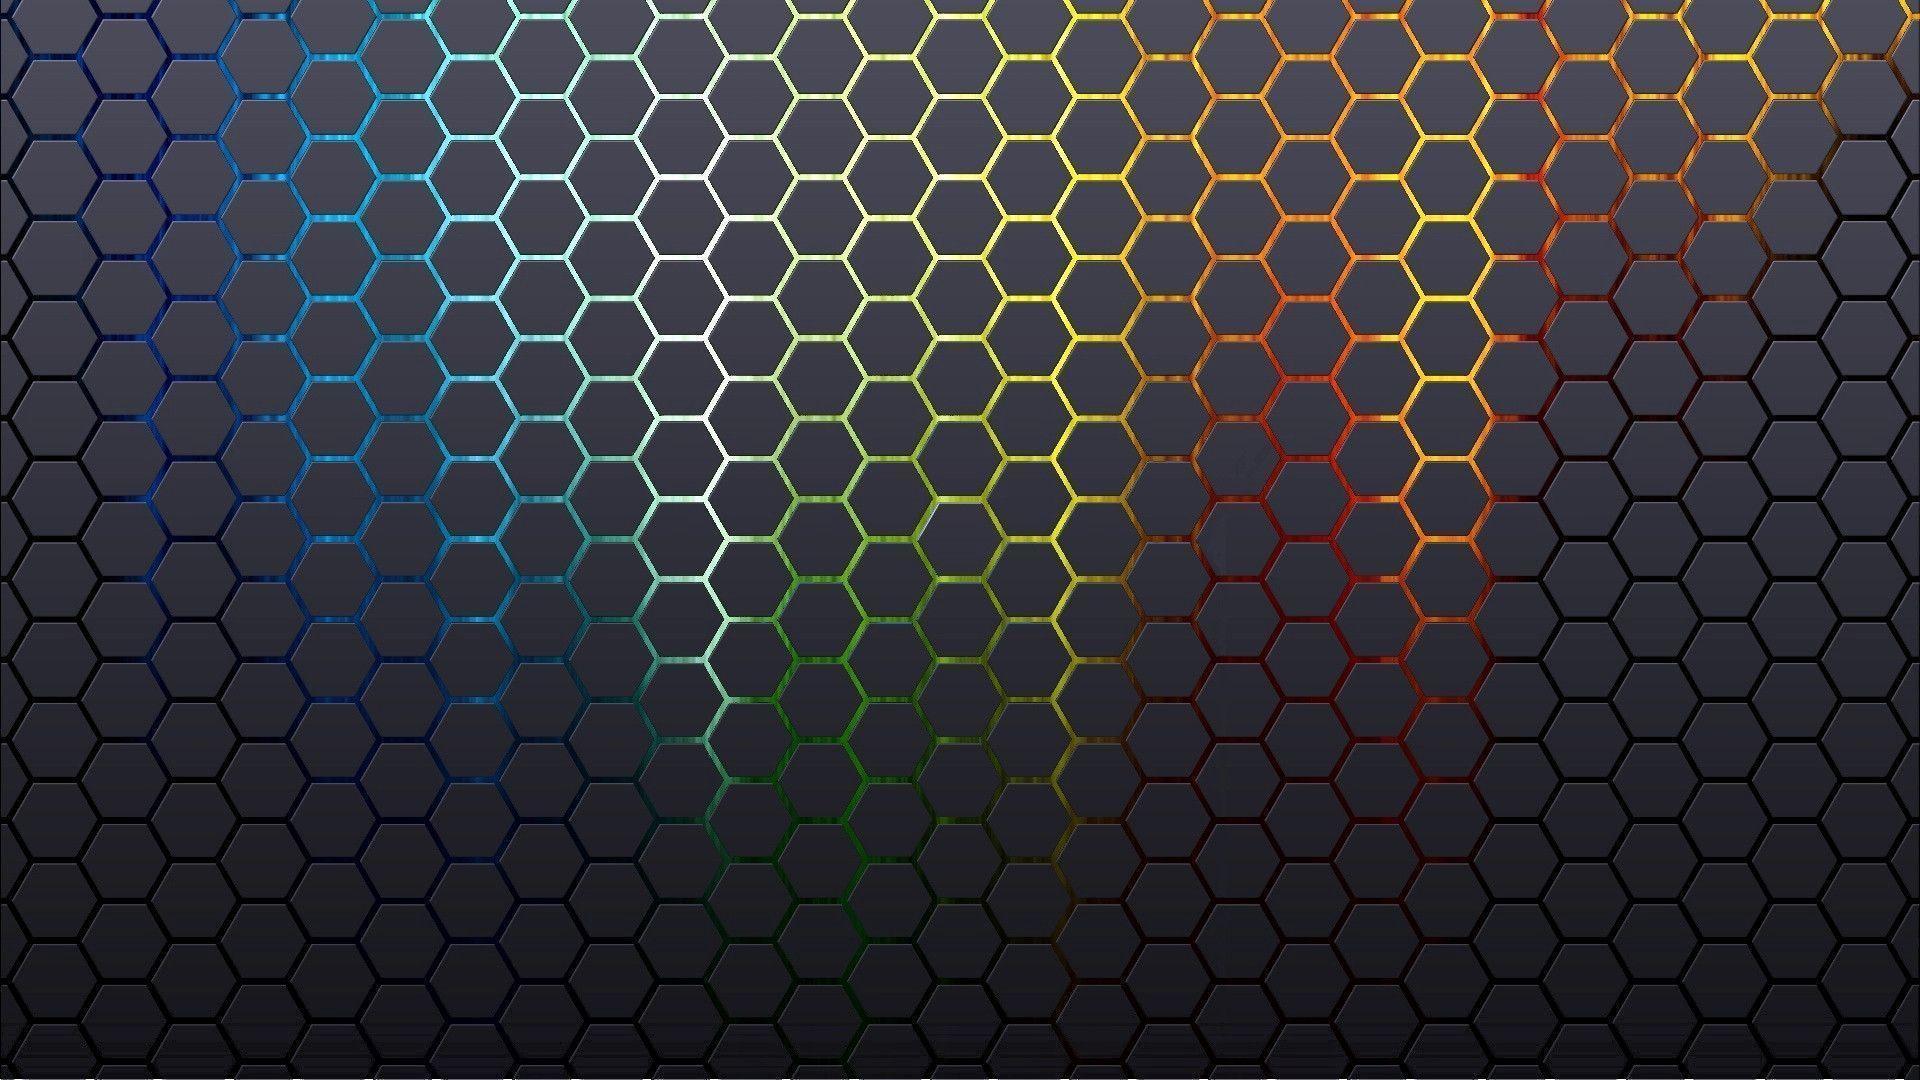 Abstract Patterns Wallpaper 1920x1080 Abstract, Patterns, Hexagons